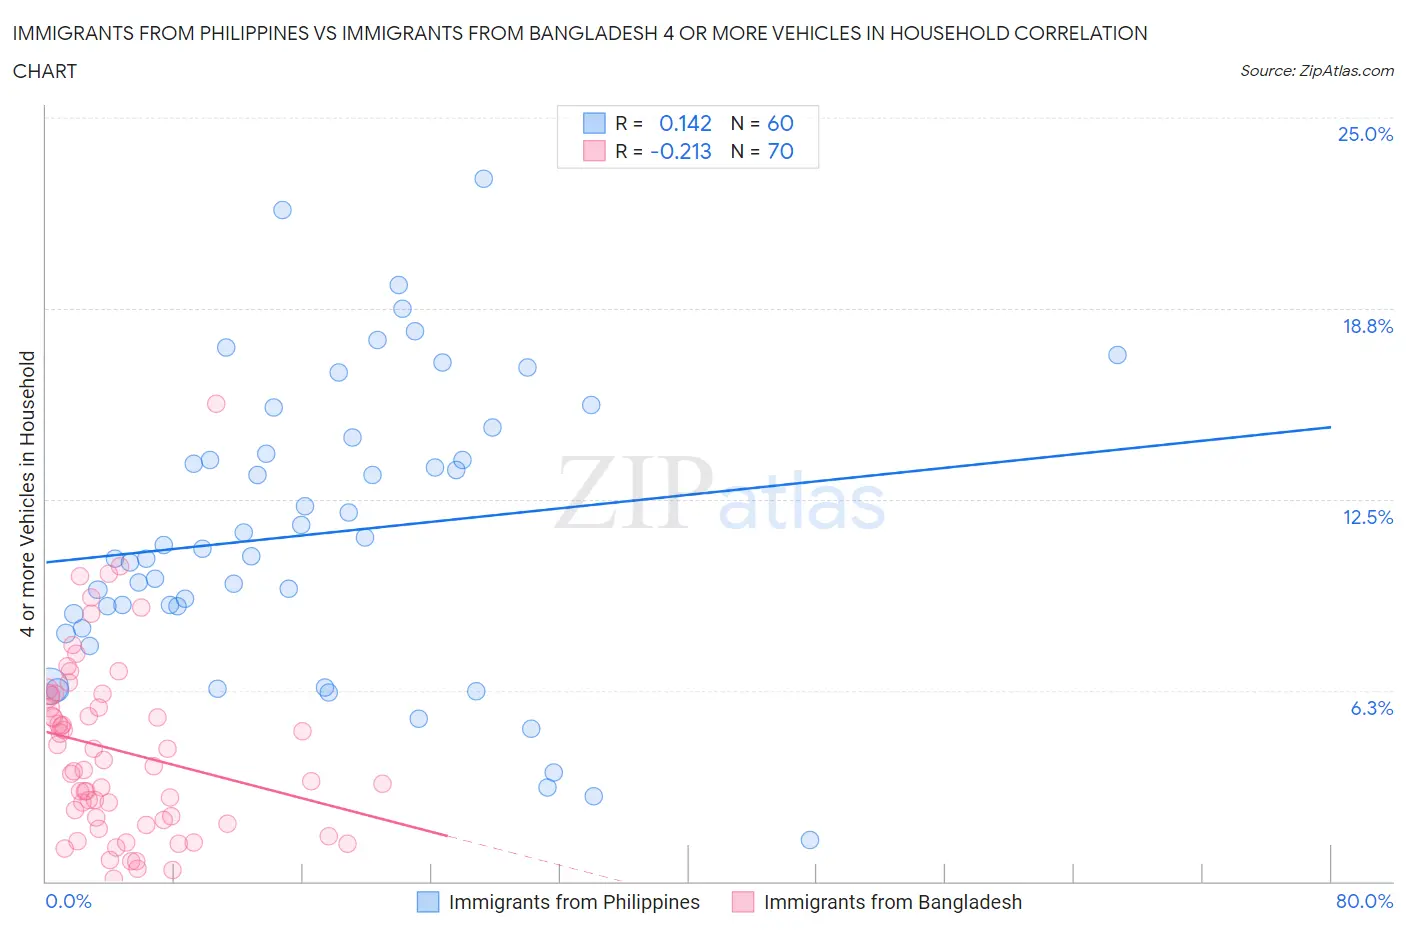 Immigrants from Philippines vs Immigrants from Bangladesh 4 or more Vehicles in Household